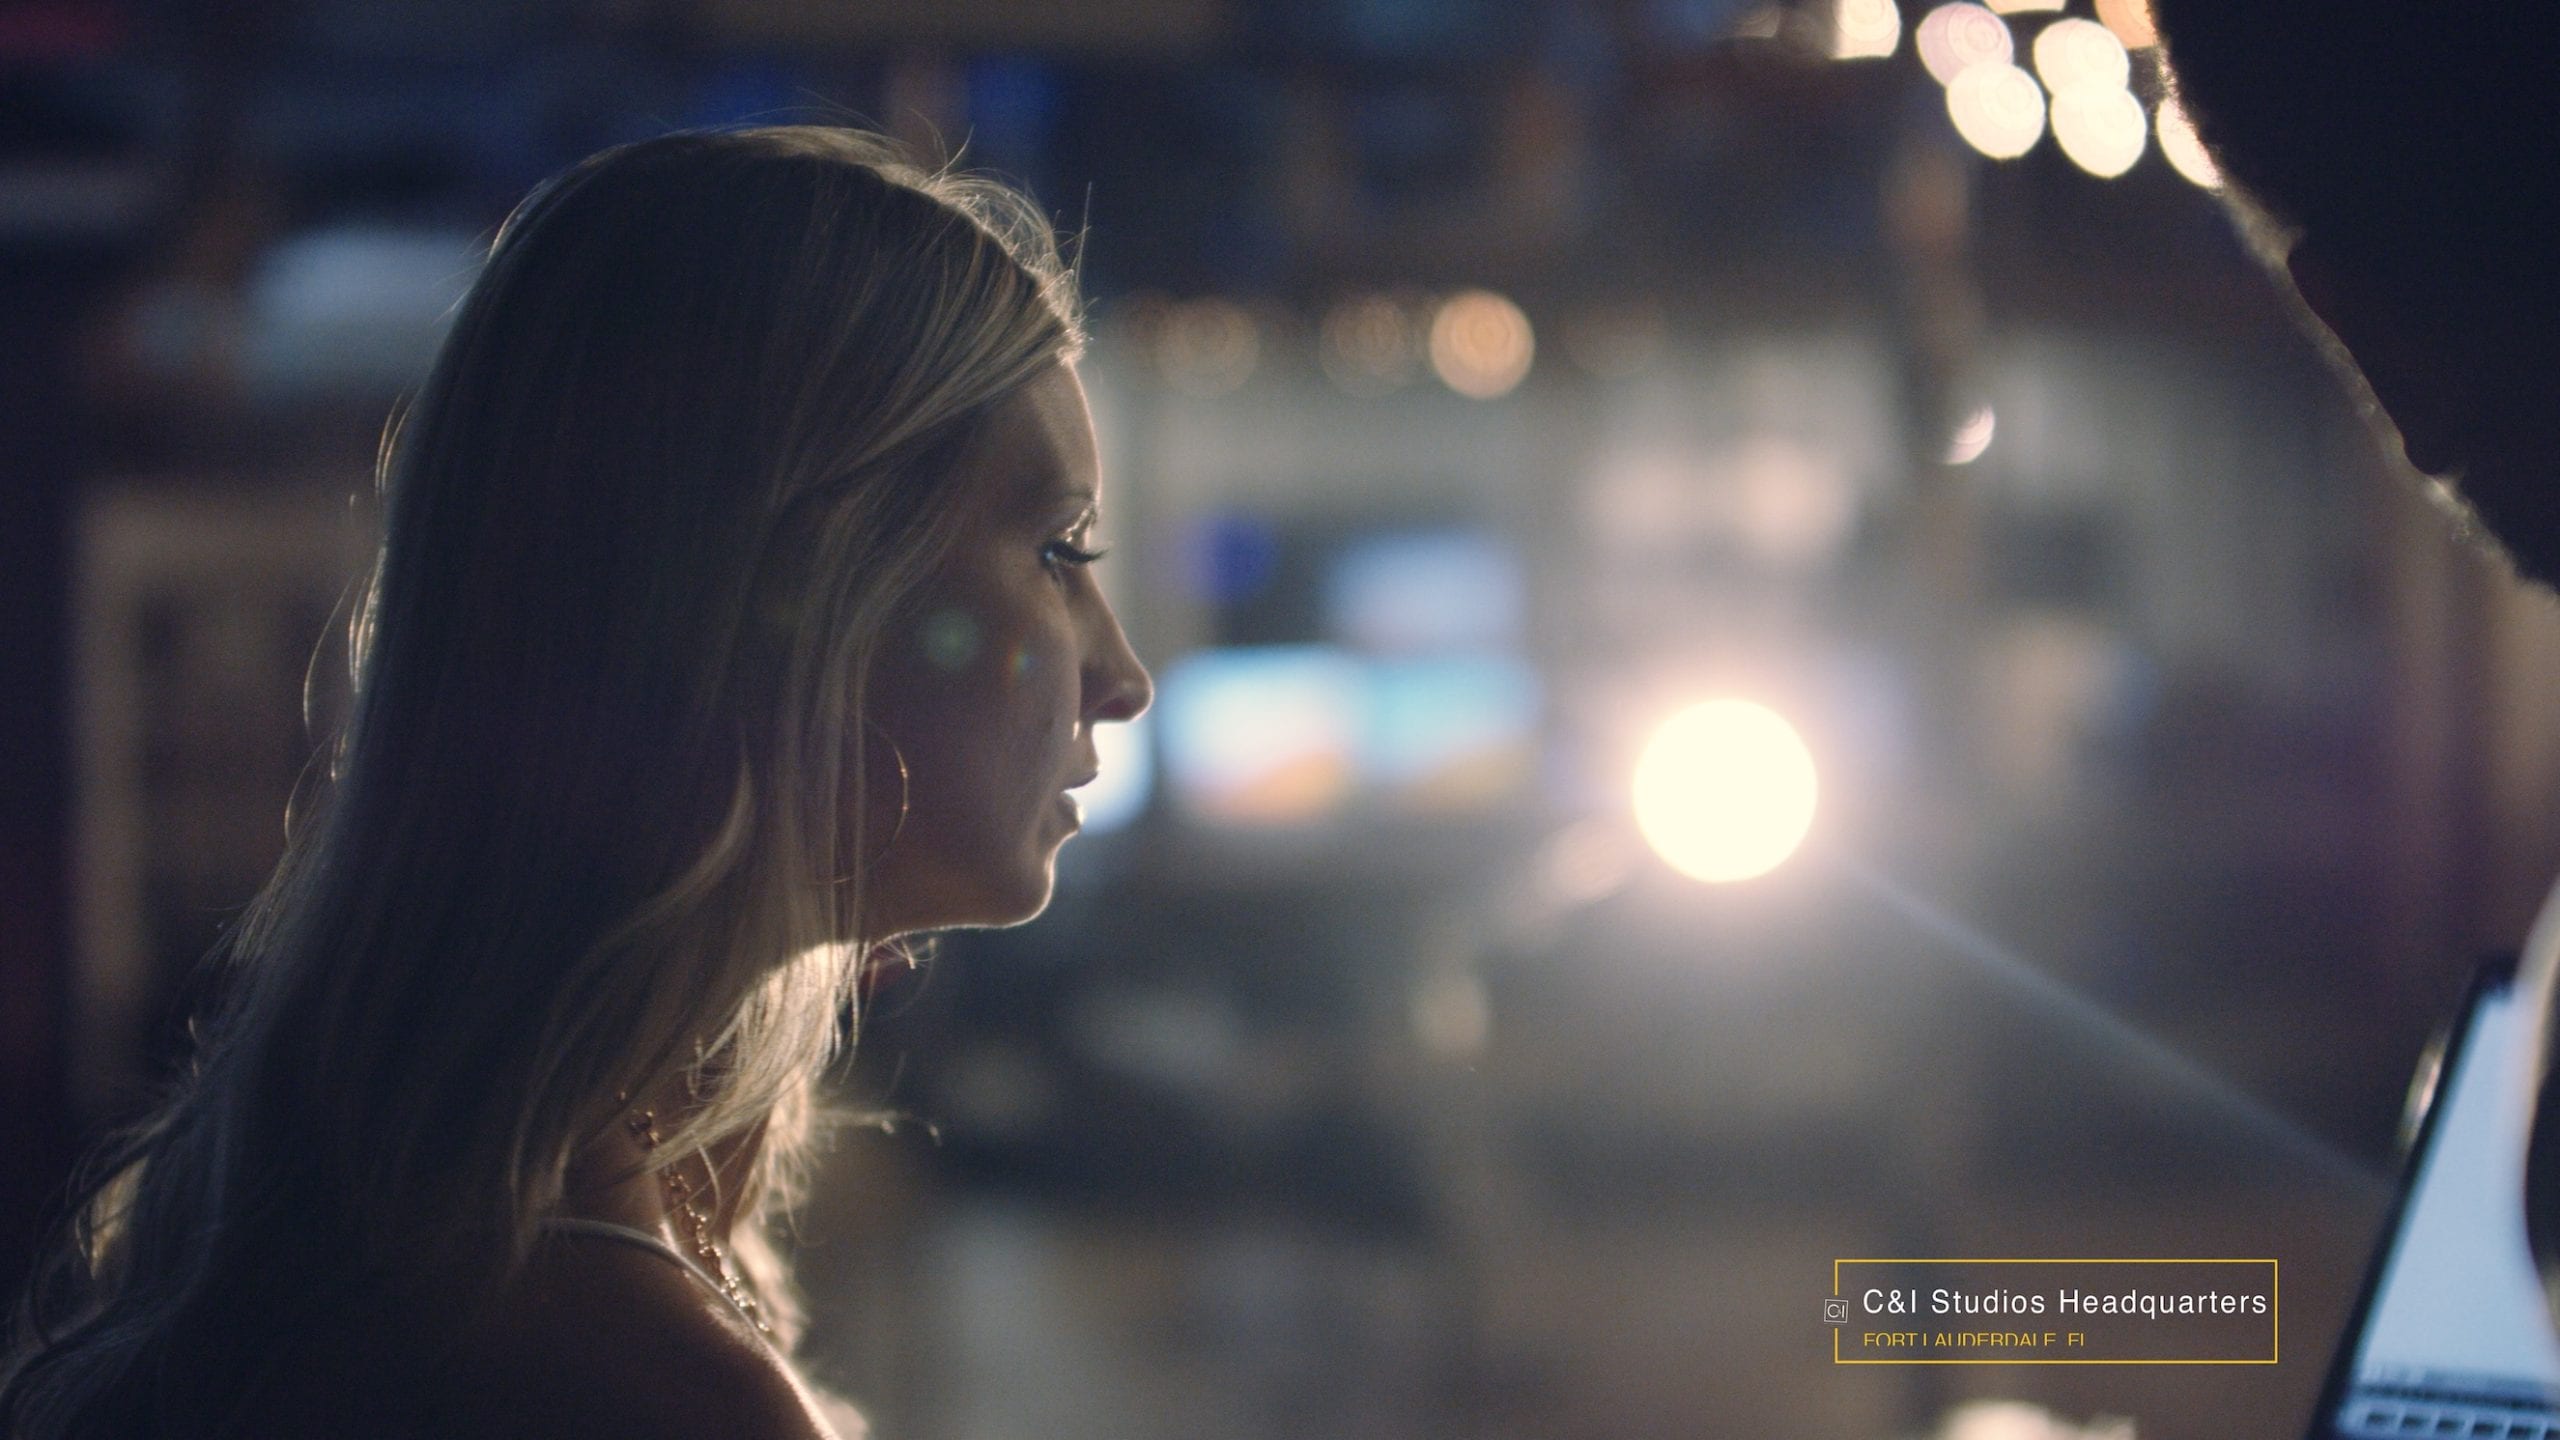 C&I Studios Company Culture takes you behind the scenes with side profile of a long, blond haired woman looking at a video display